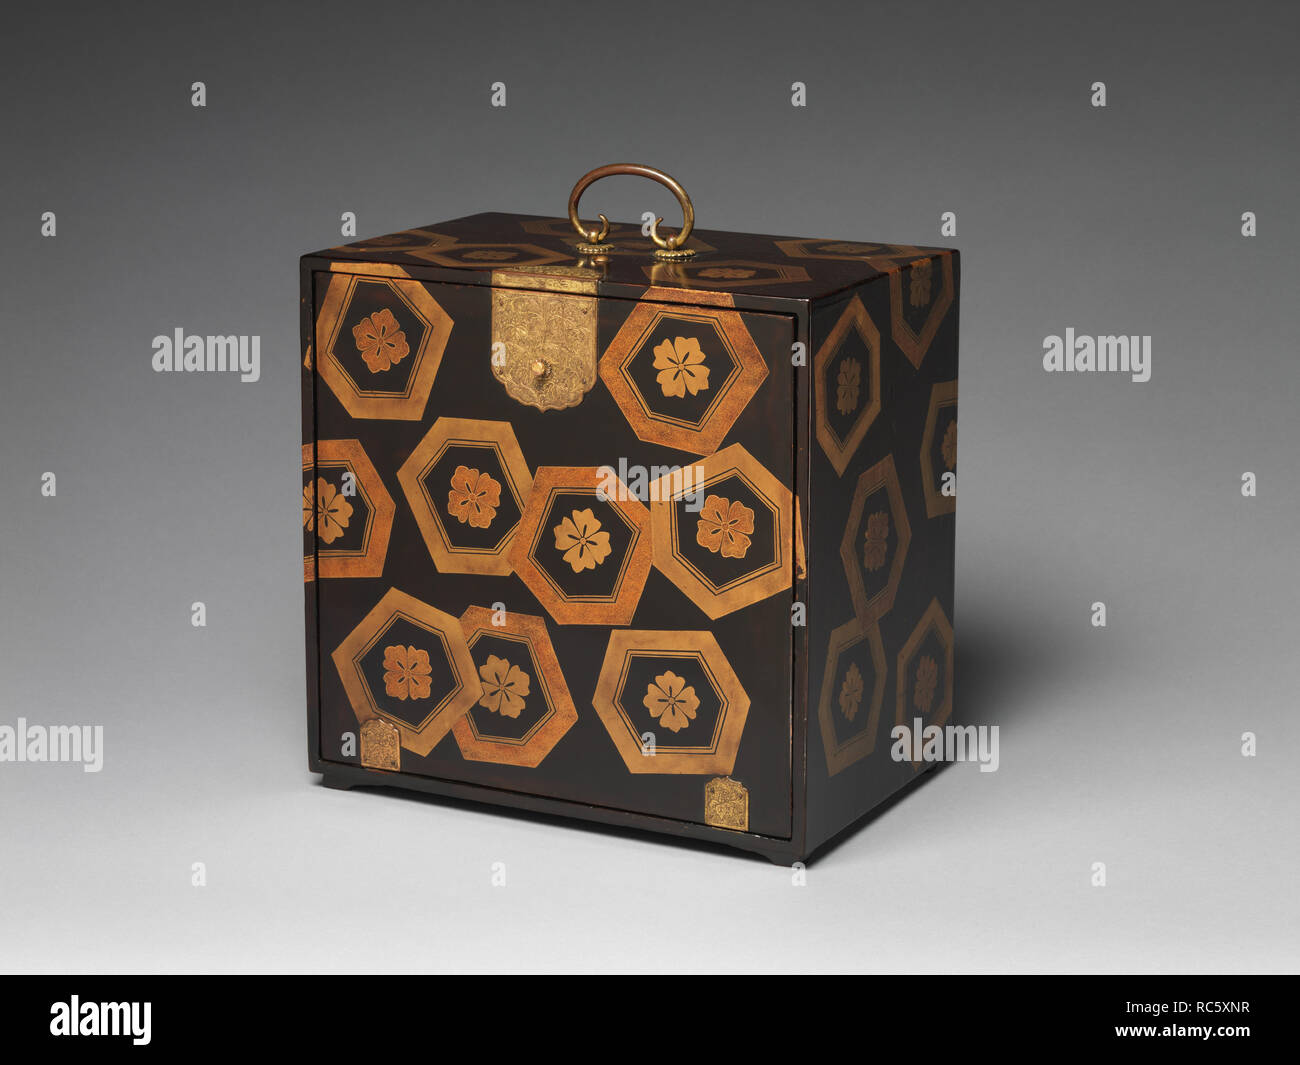 Cabinet with Design of Stylized Tortoiseshell Patterns. Culture: Japan. Dimensions: L.14 1/8 in. (35.9 cm); W. 9 1/2 in. (24.1 cm); H.14 1/4 in. (36.2 cm). Date: late 16th-early 17th century.  Often referred to as medicine chests, boxes such as this one, with a front cover and interior drawers, were also designed for traveling. The dramatic rendering of stylized tortoiseshells on the exterior is matched by the three wonderful cranes found on the front of the drawers. In both China and Japan, these motifs are often associated with a mythical mountain inhabited by immortals. Museum: Metropolitan Stock Photo